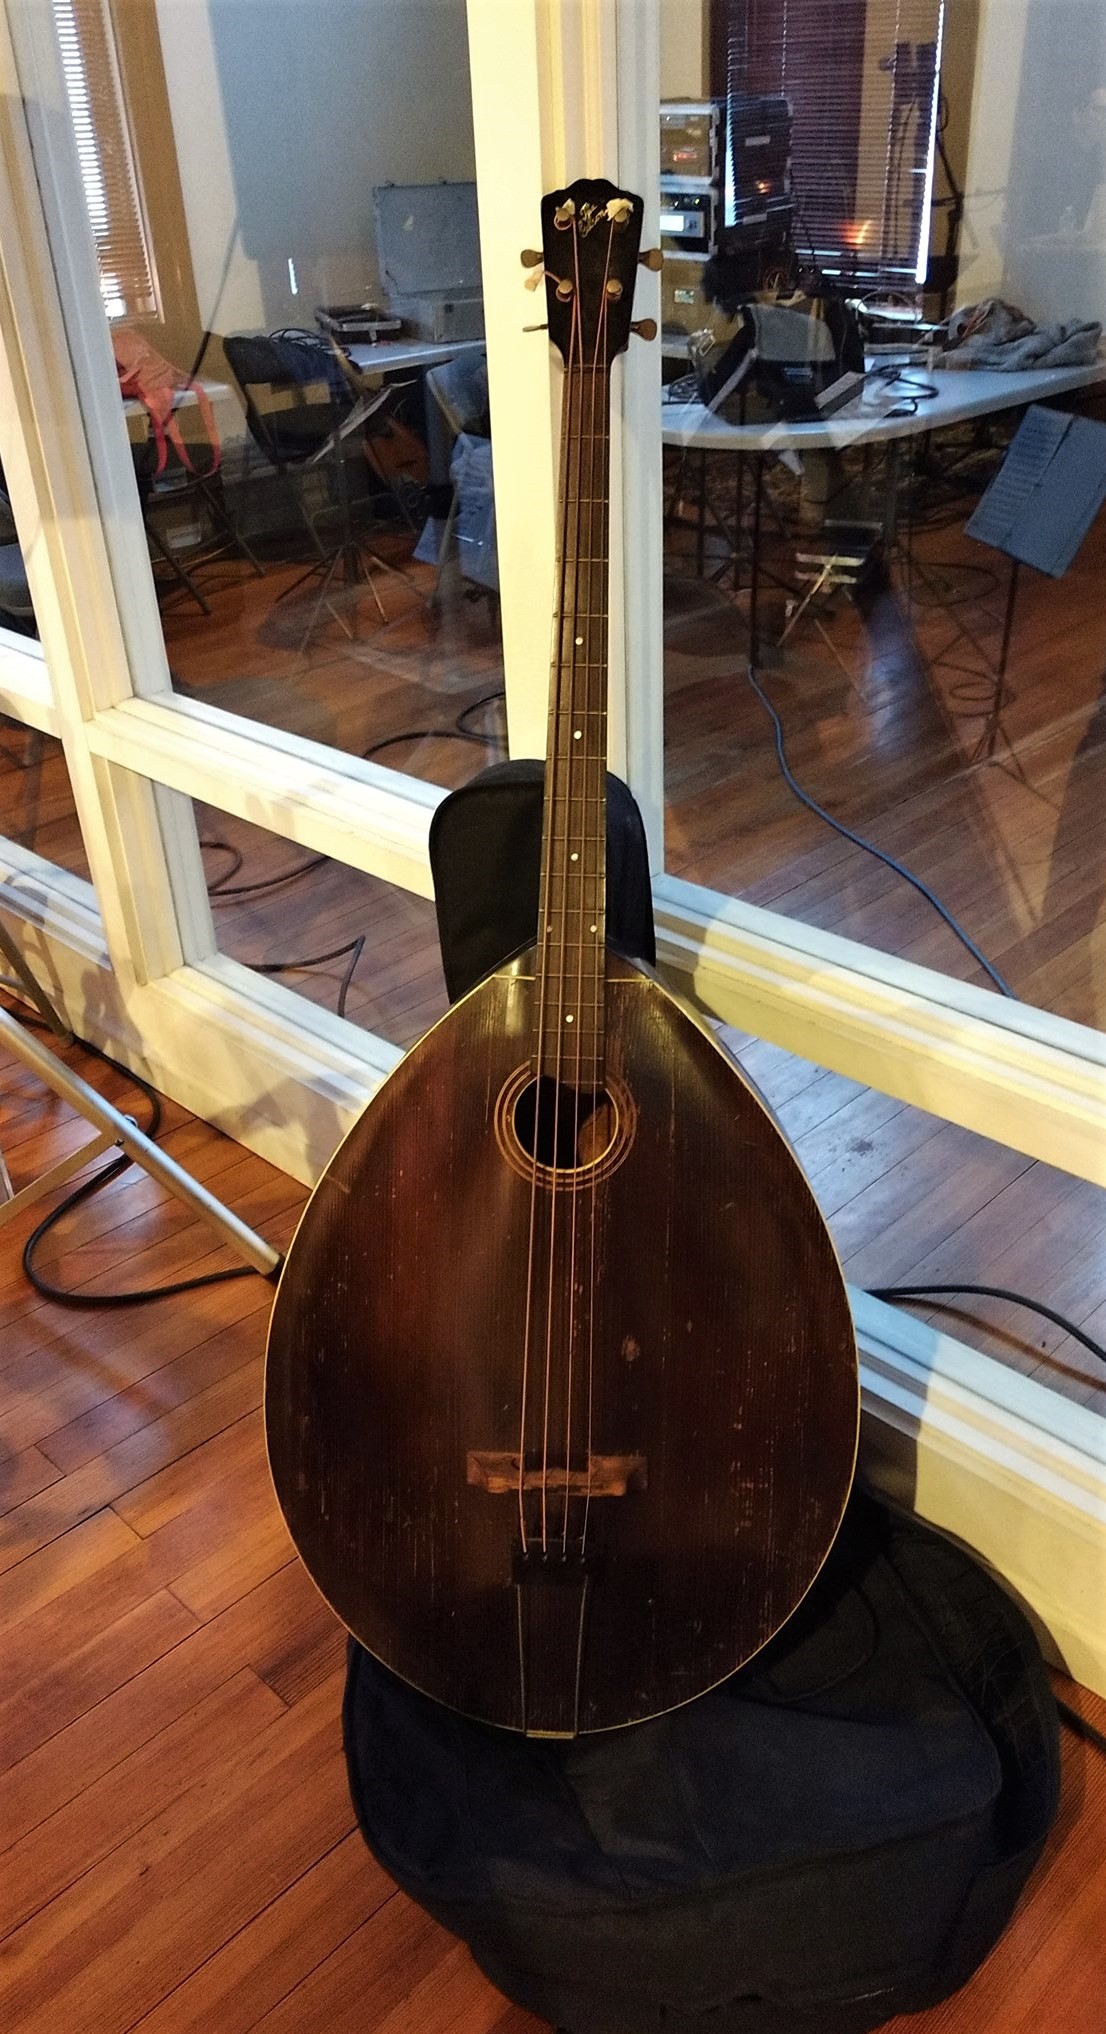 Photograph of a mandobass owned by a member of the Orpheus Mandolin Orchestra.